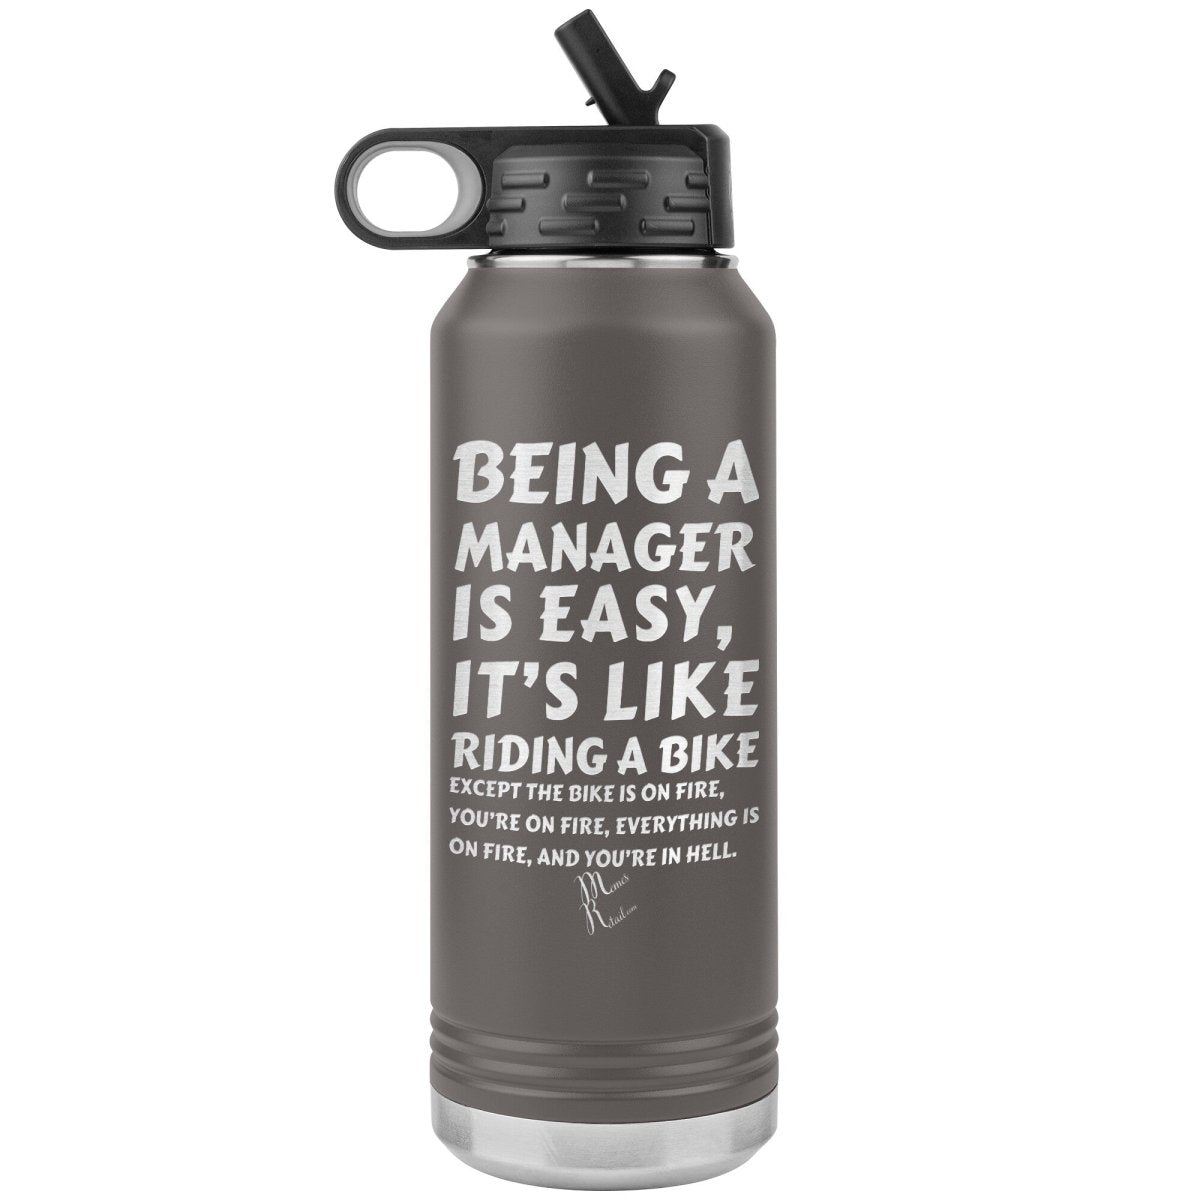 Being a manager is easy….32oz Water Tumbler, Pewter - MemesRetail.com